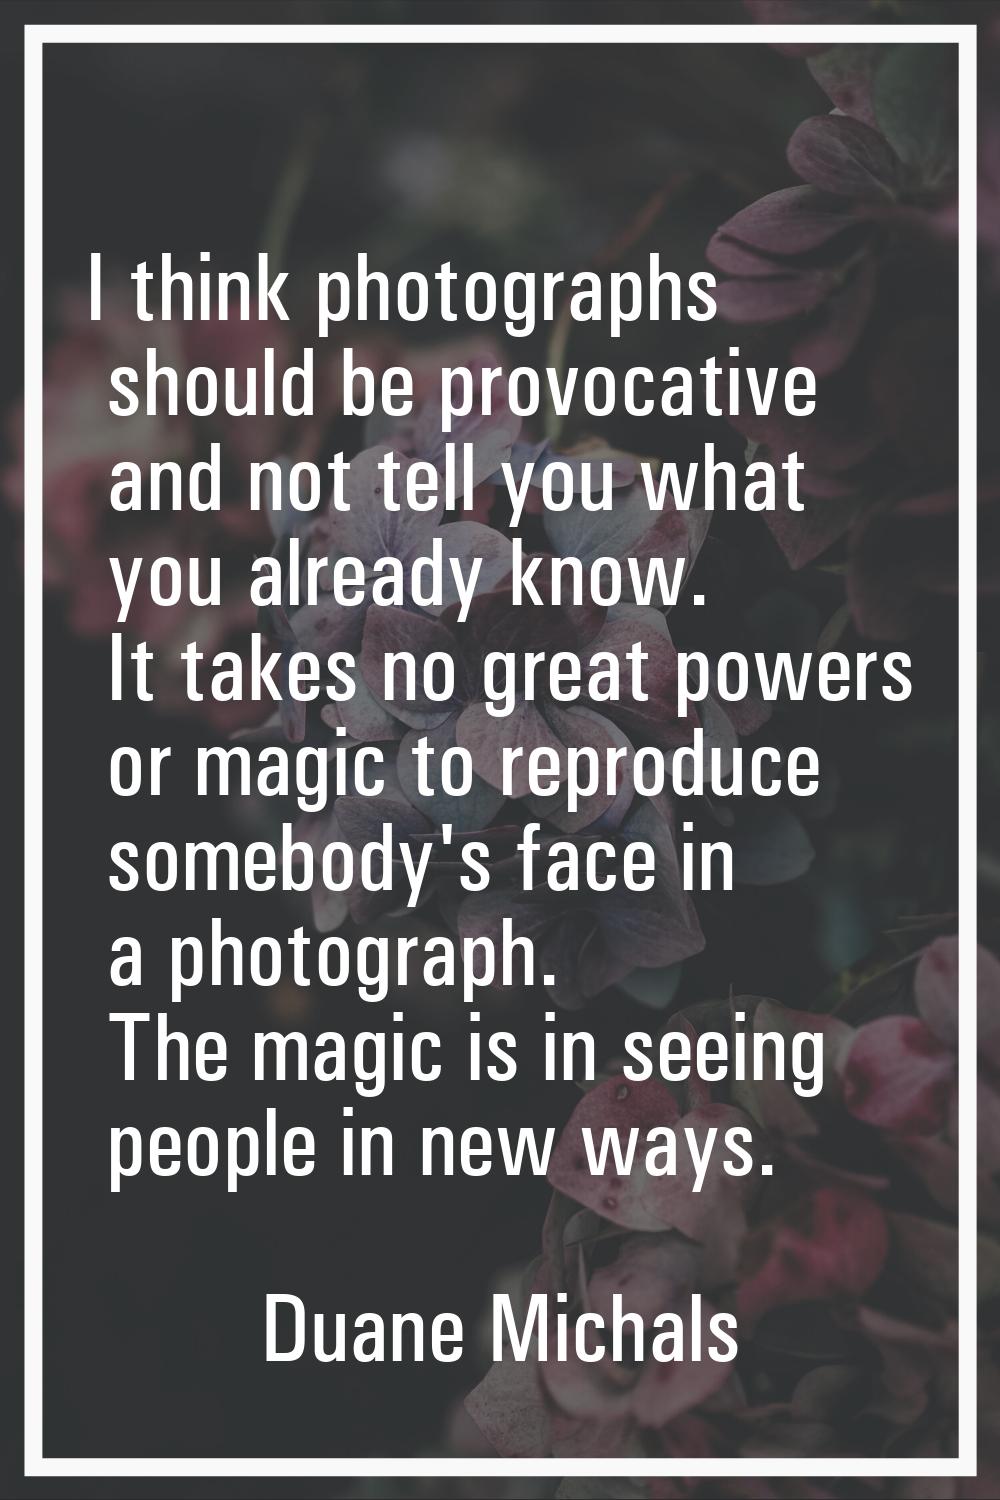 I think photographs should be provocative and not tell you what you already know. It takes no great